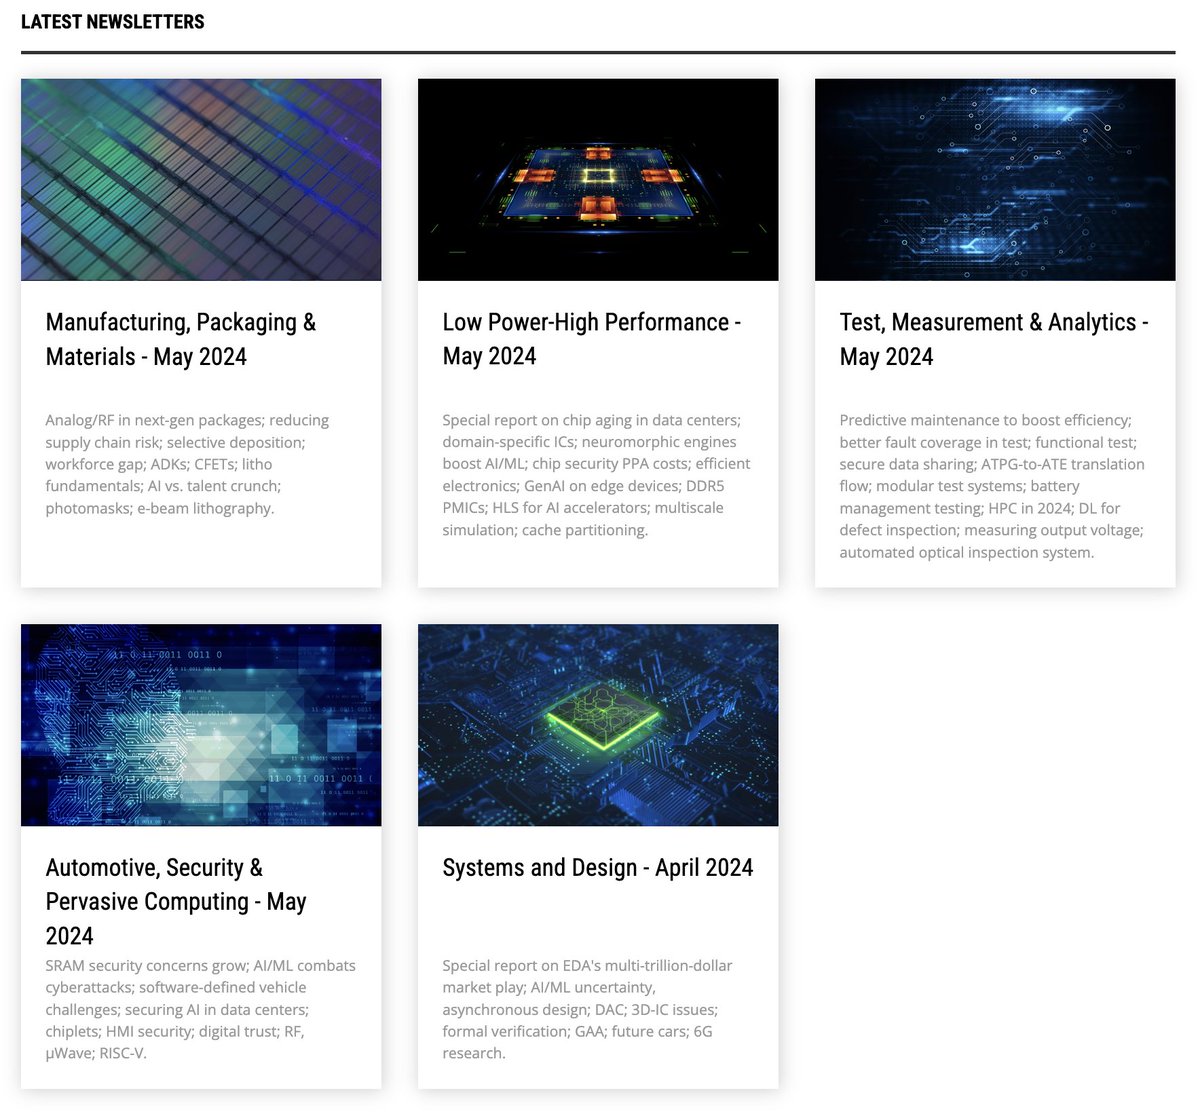 Find SemiEngineering's latest newsletters here semiengineering.com/insights-newsl… There are 5 channels to choose from. Newsletter signup is free. #semiconductor #semiEDA #lowpower #HPC #semiconductormanufacturing #VLSI #dataanalytics #chipdesign #automotive #hardwaresecurity